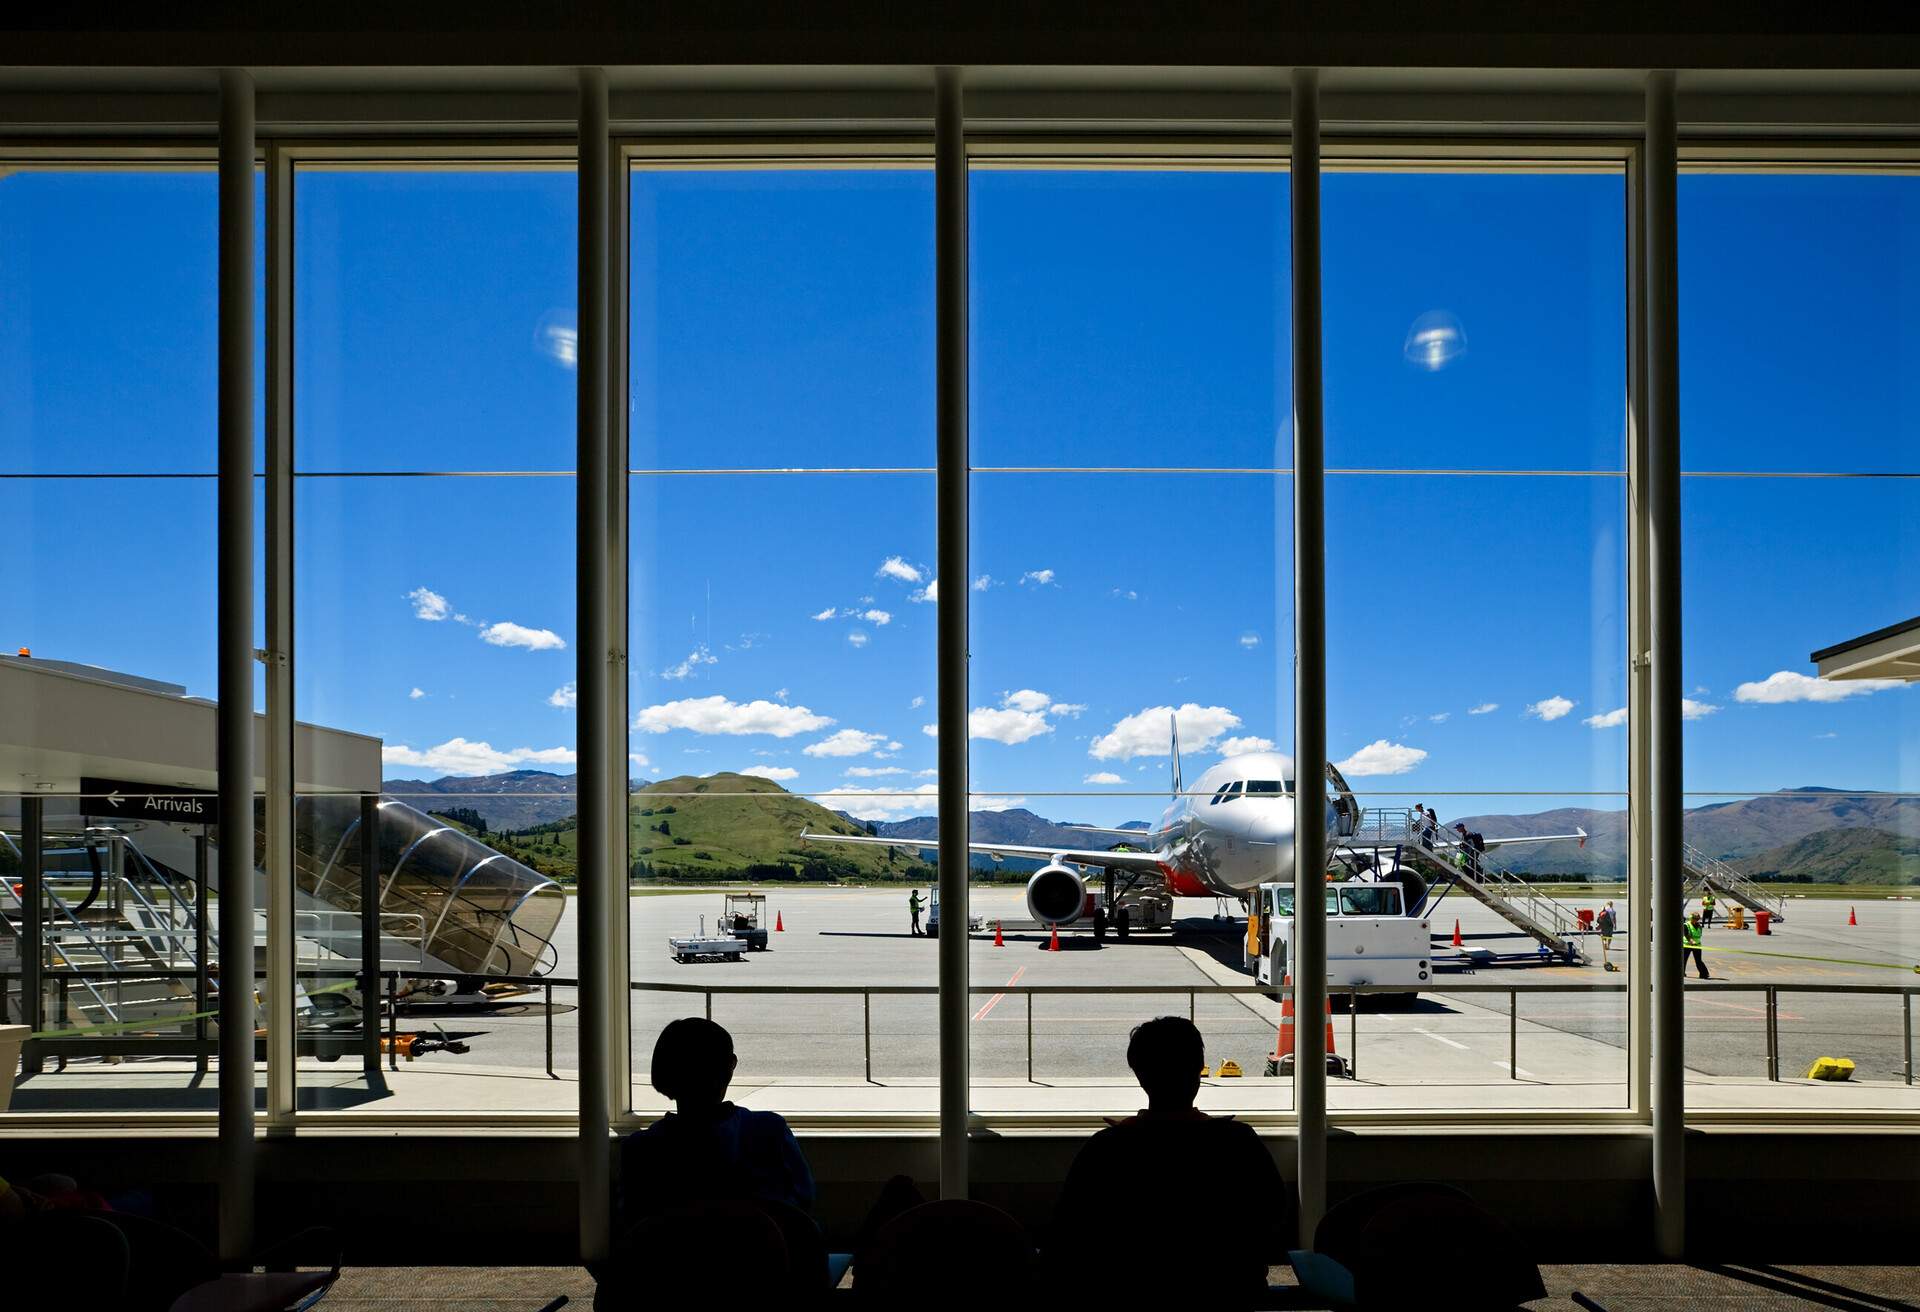 View of airport through window and silouhette of people